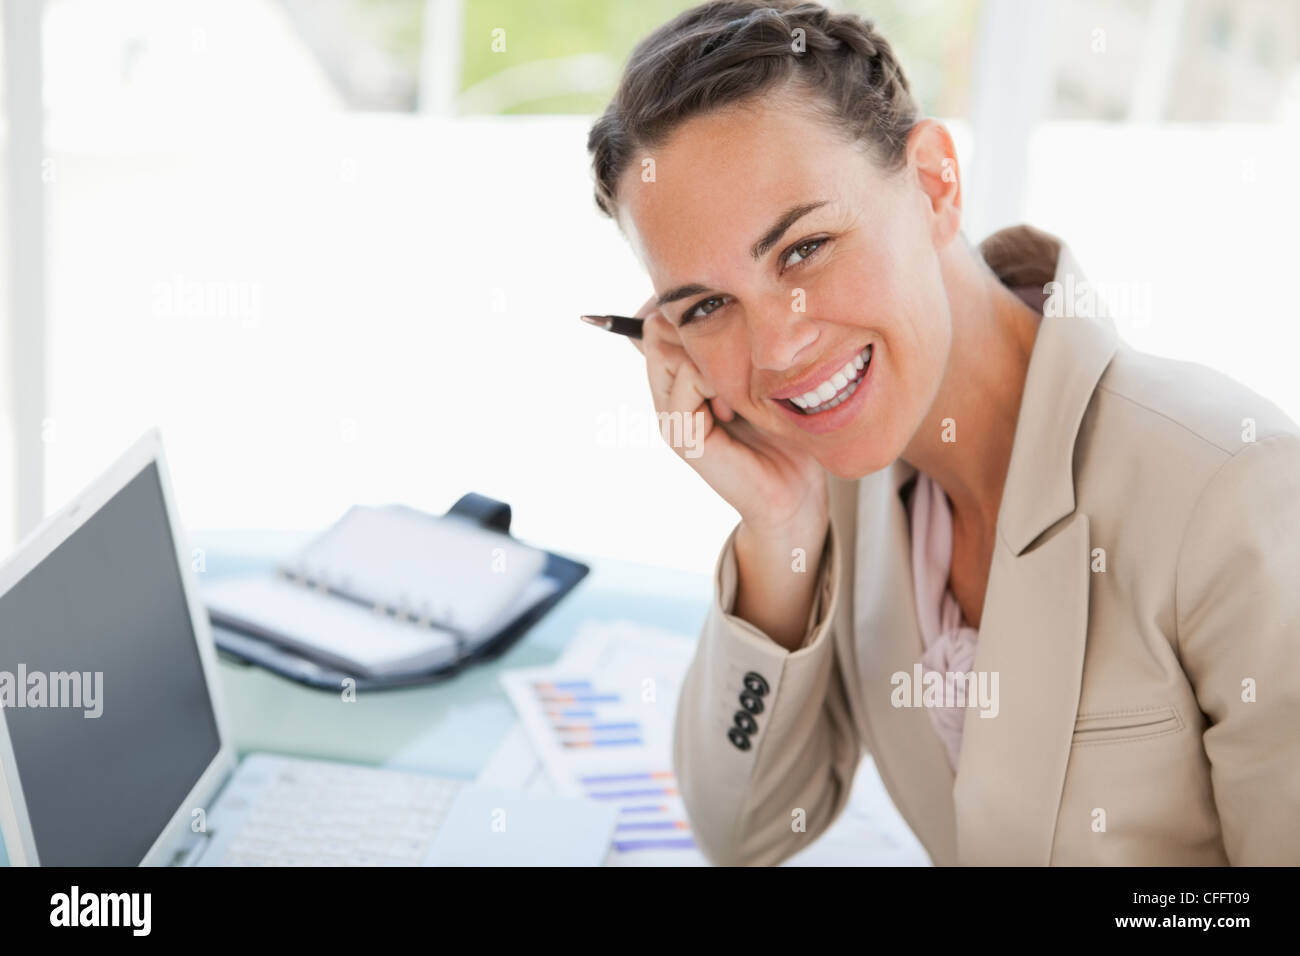 Portrait of a smiling businesswoman with a braid Stock Photo